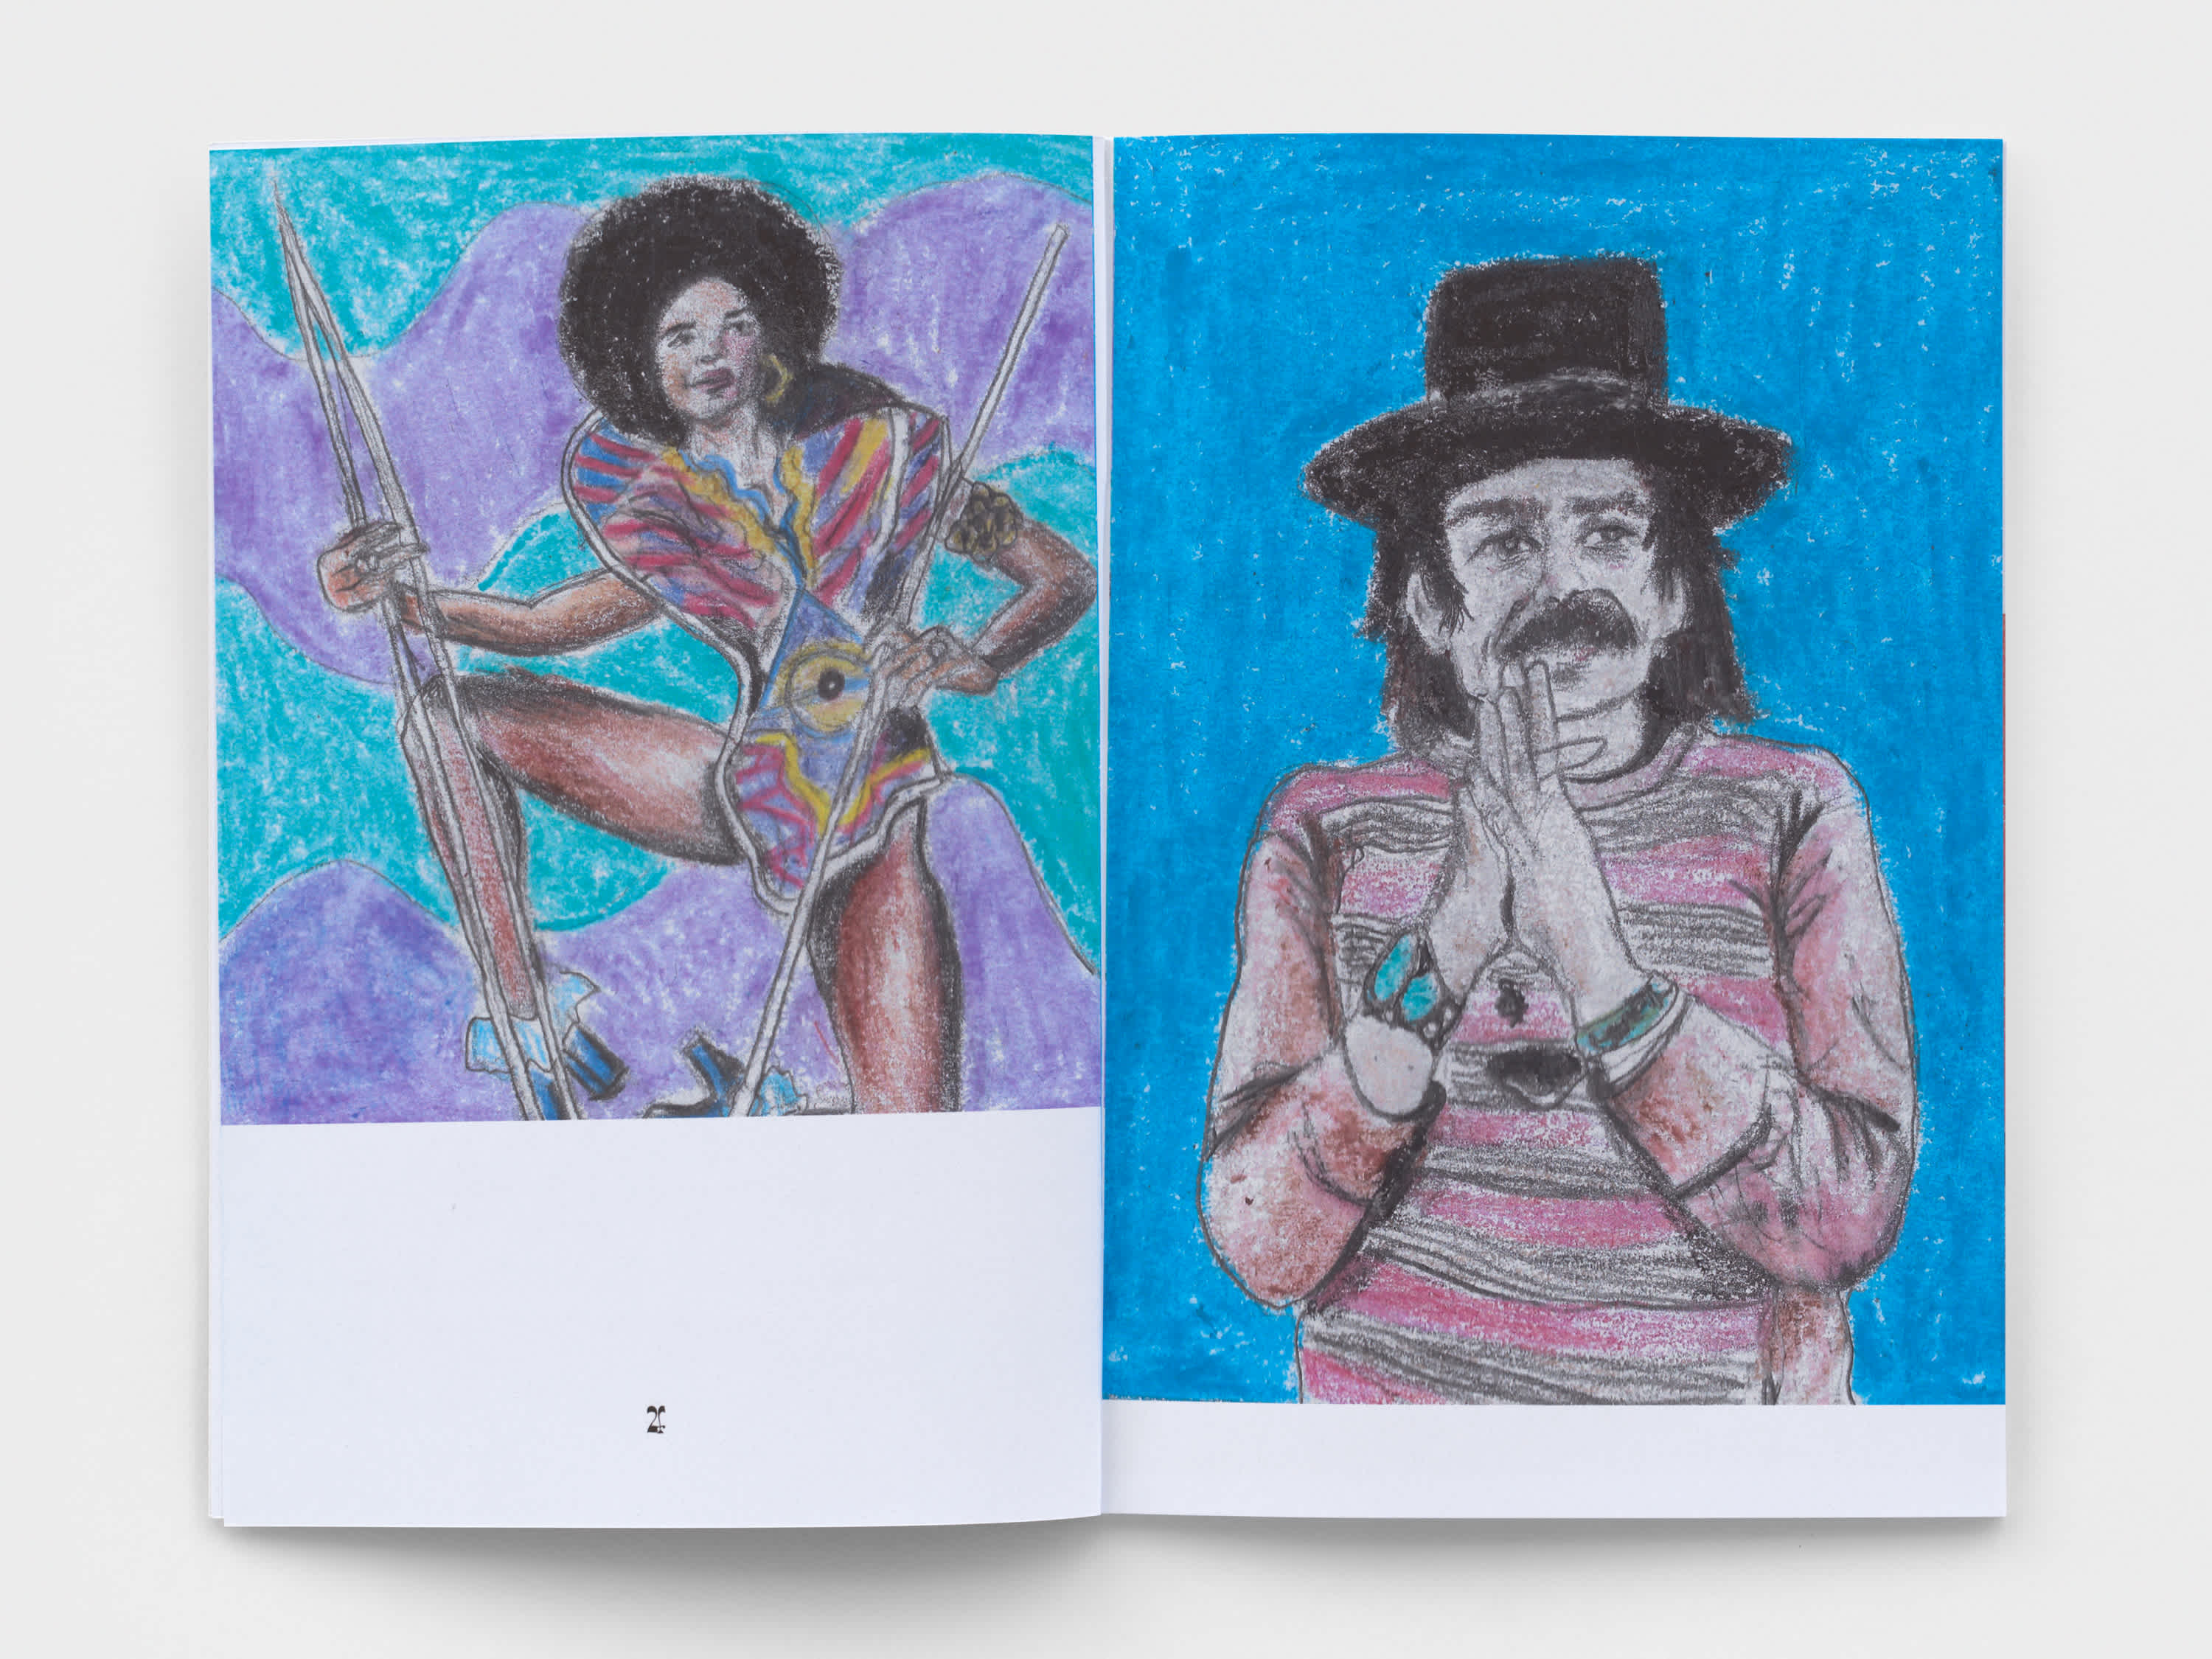 Two crayon drawings on the pages of an open book. Each drawing features a prominent musician in front of a blue background.